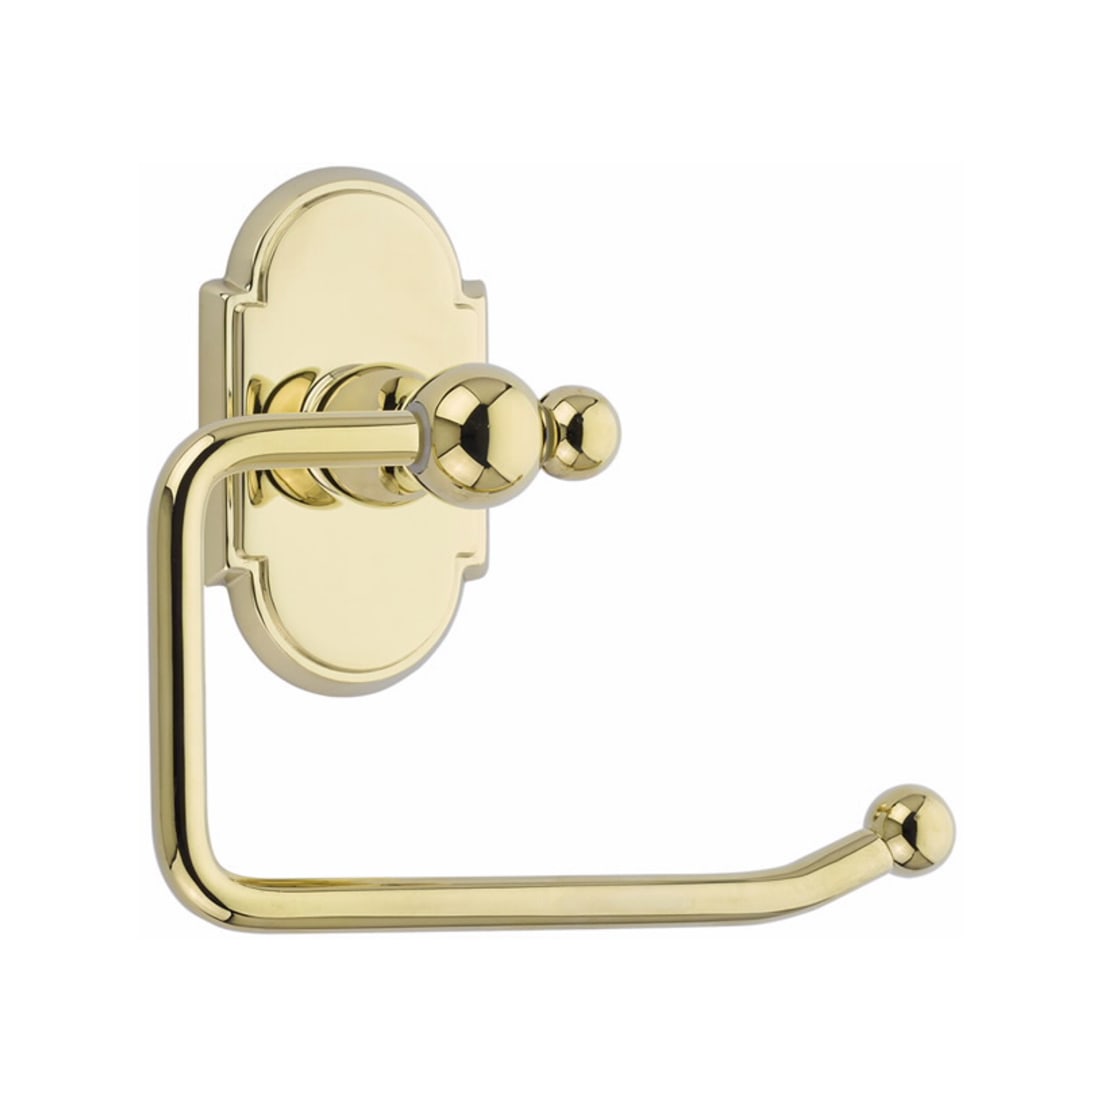 26031 - Traditional Brass - 18 Double Towel Bar - French Antique